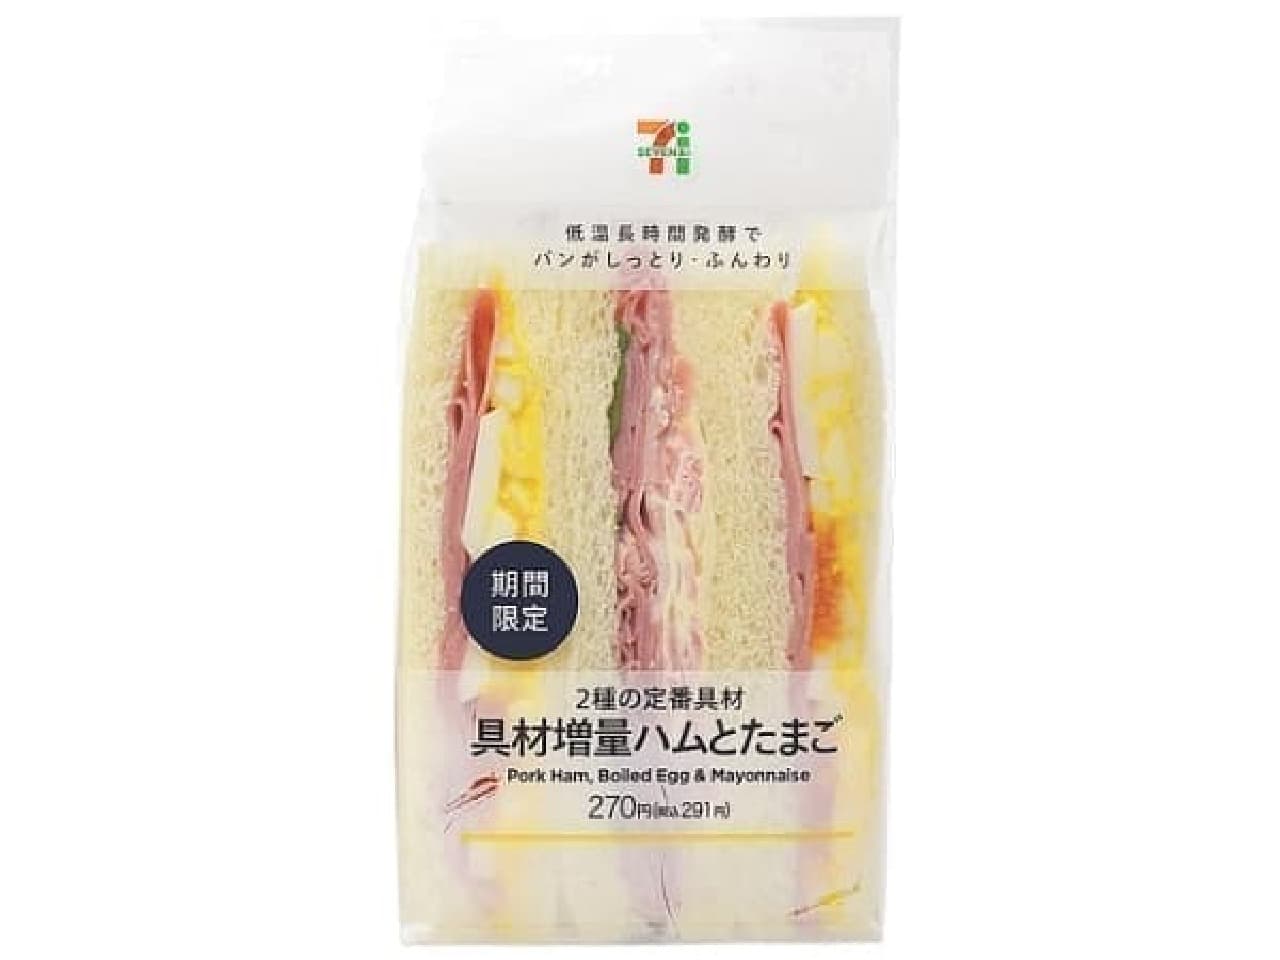 7-ELEVEN "Ingredients Increased Ham and Egg Sandwich"